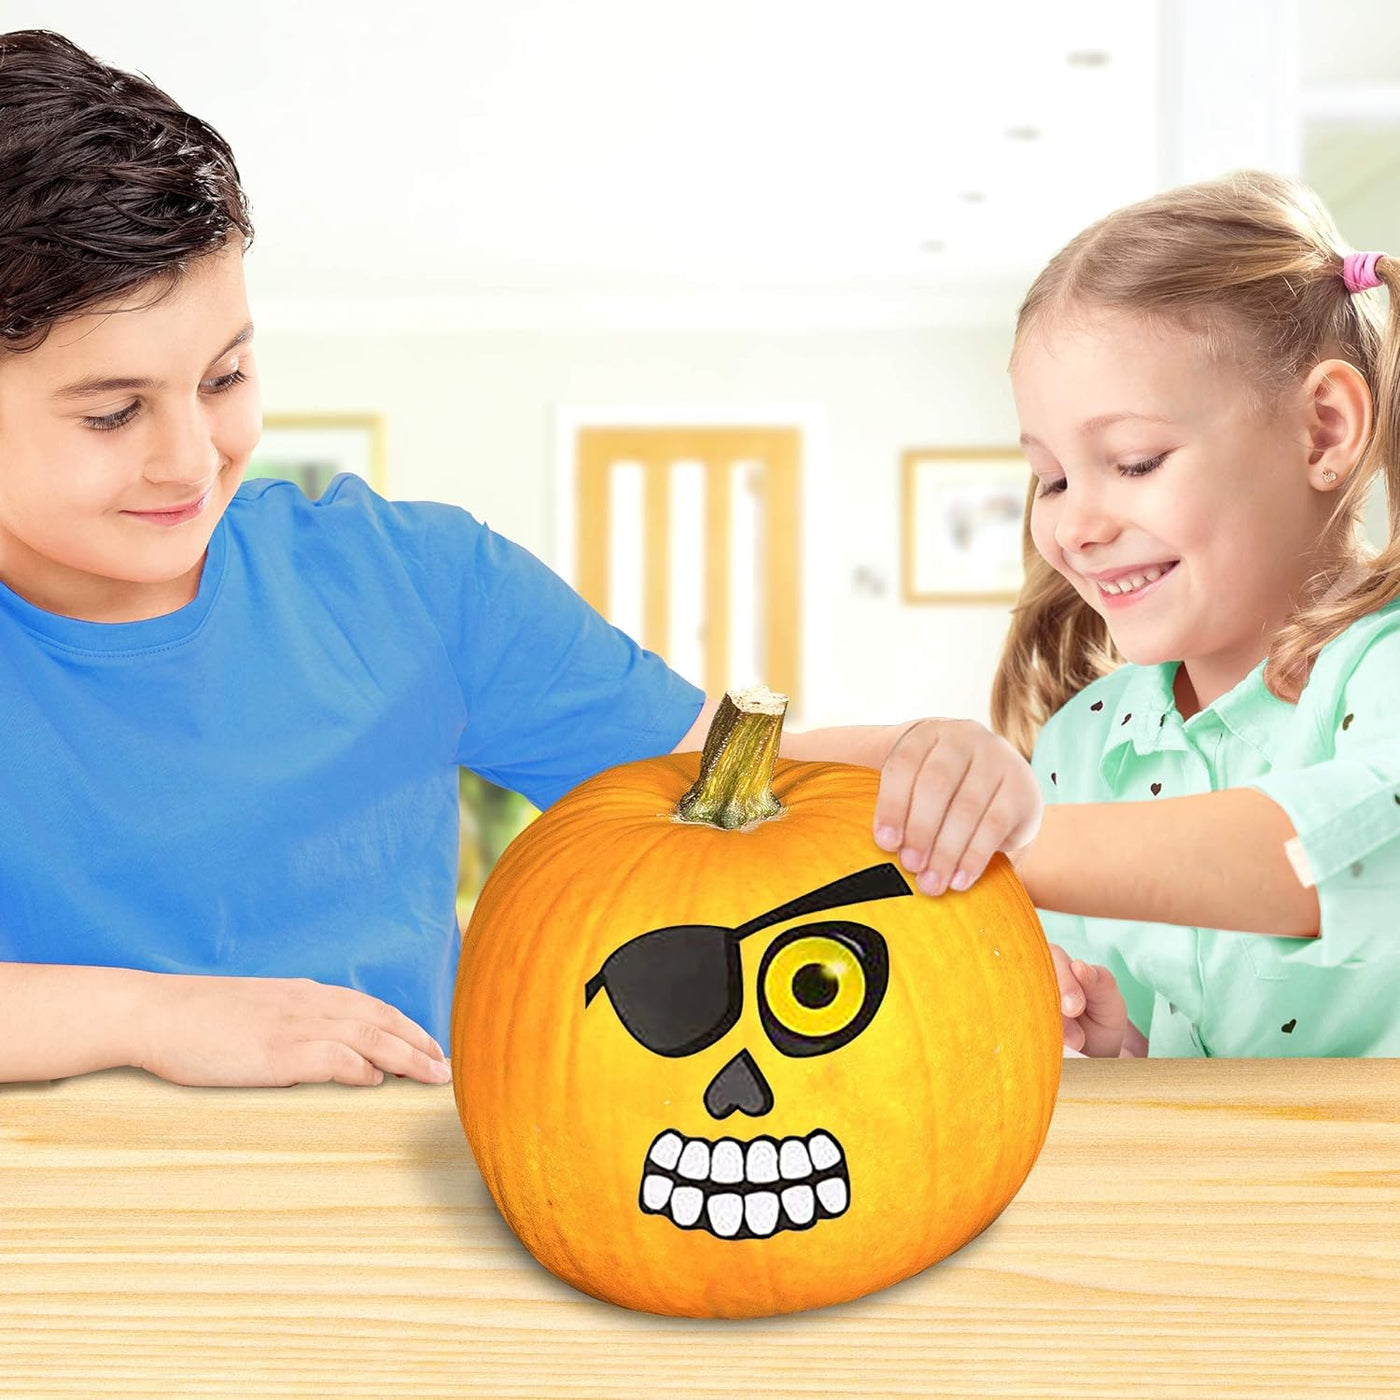 ArtCreativity Halloween Pumpkin Decorating Stickers - 12 Large Sheets - Jack-o-Lantern Decoration Kit - 26 Total Face Stickers - Cute Halloween Decor Idea - Treats, Gifts, and Crafts for Kids- 6" x 9"